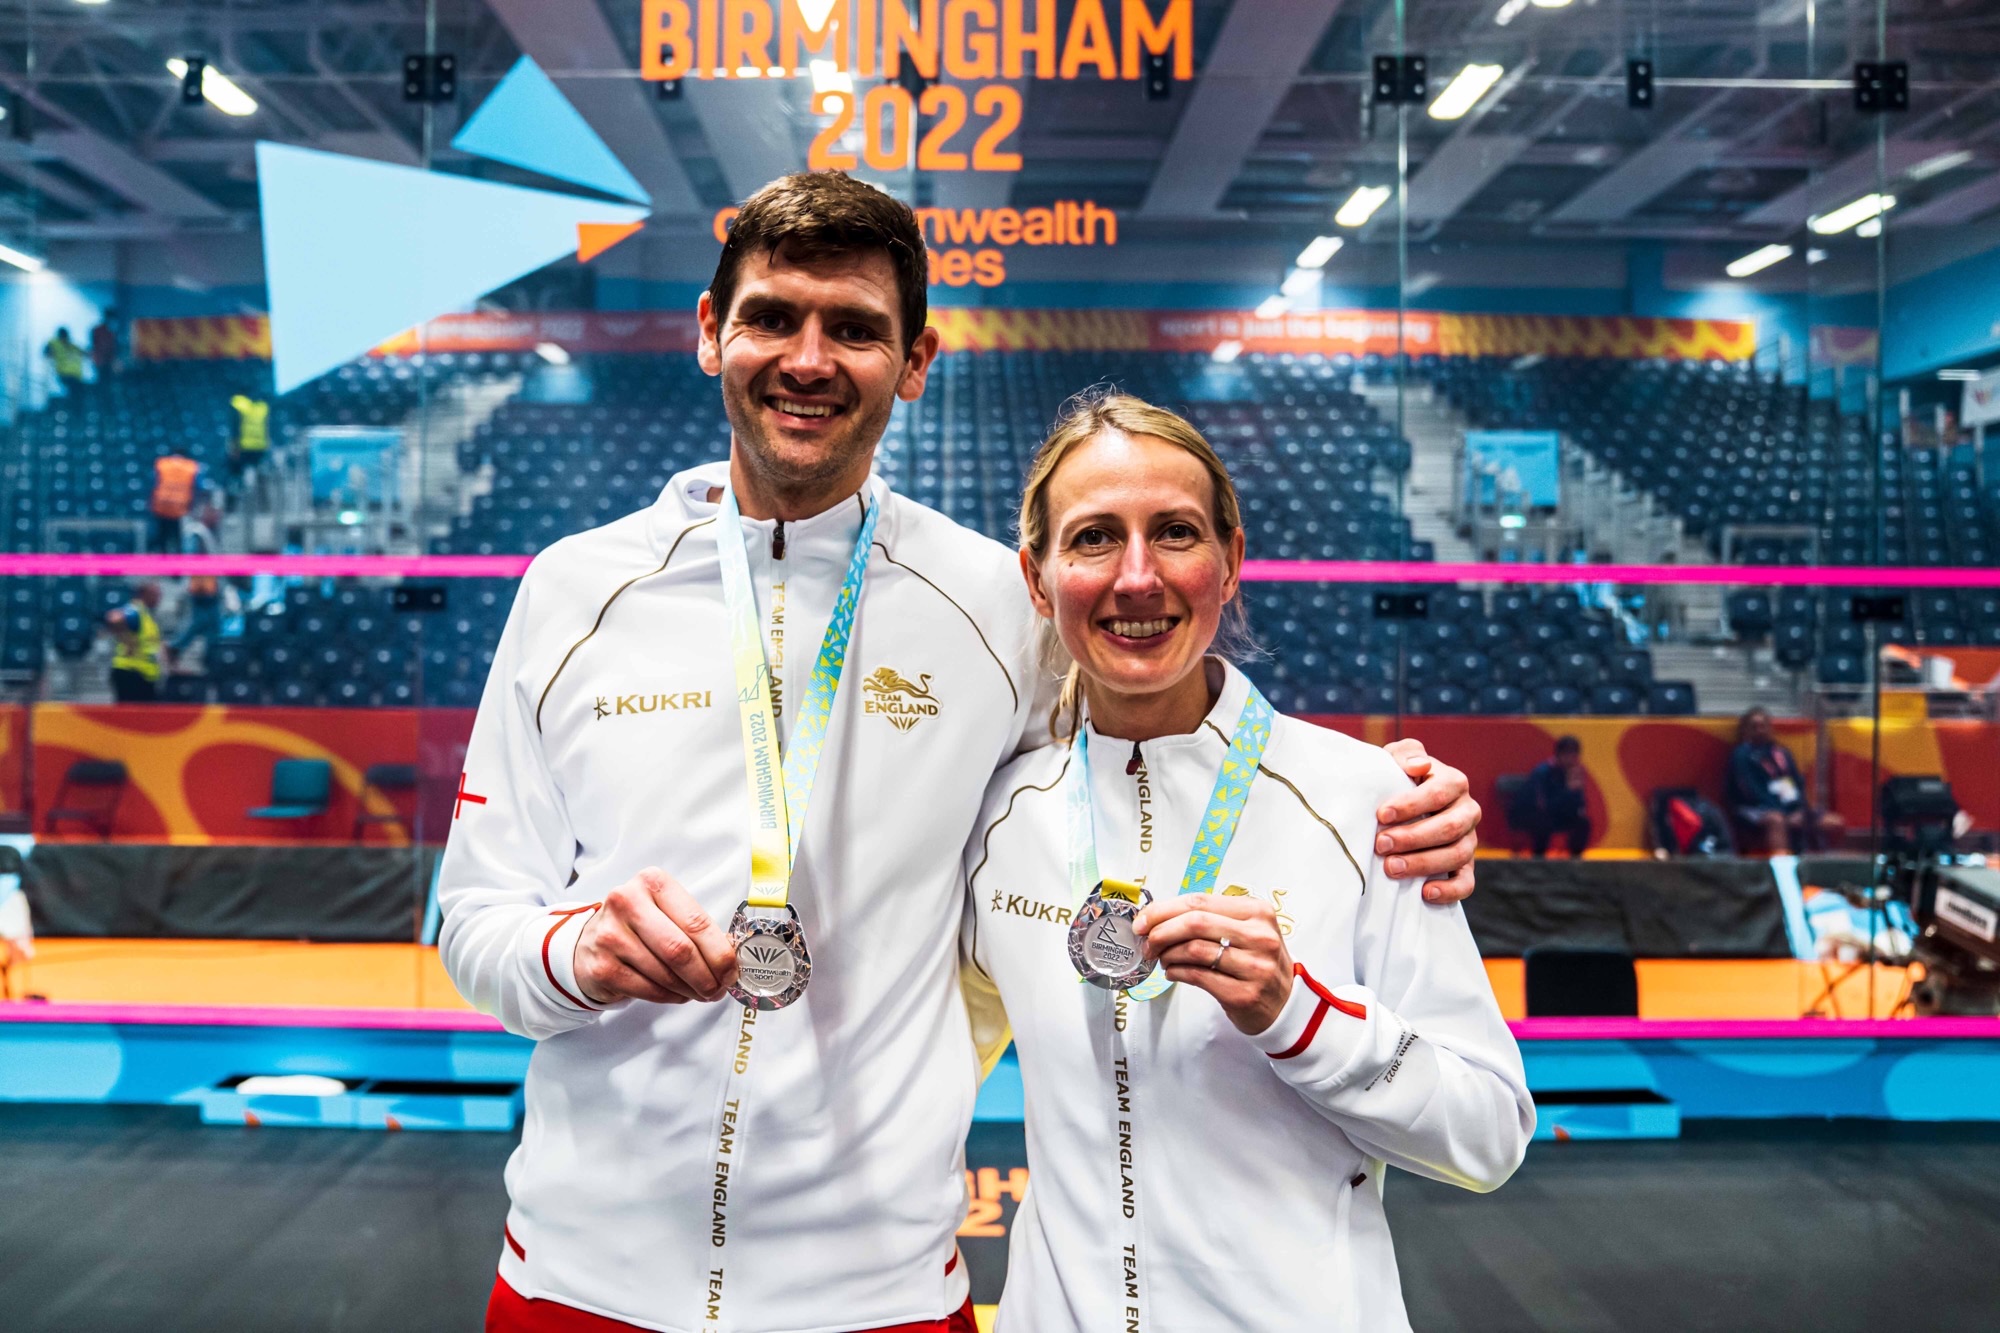 Image - MSc Psychology of Sport and Exercise student wins two medals at the Commonwealth Games